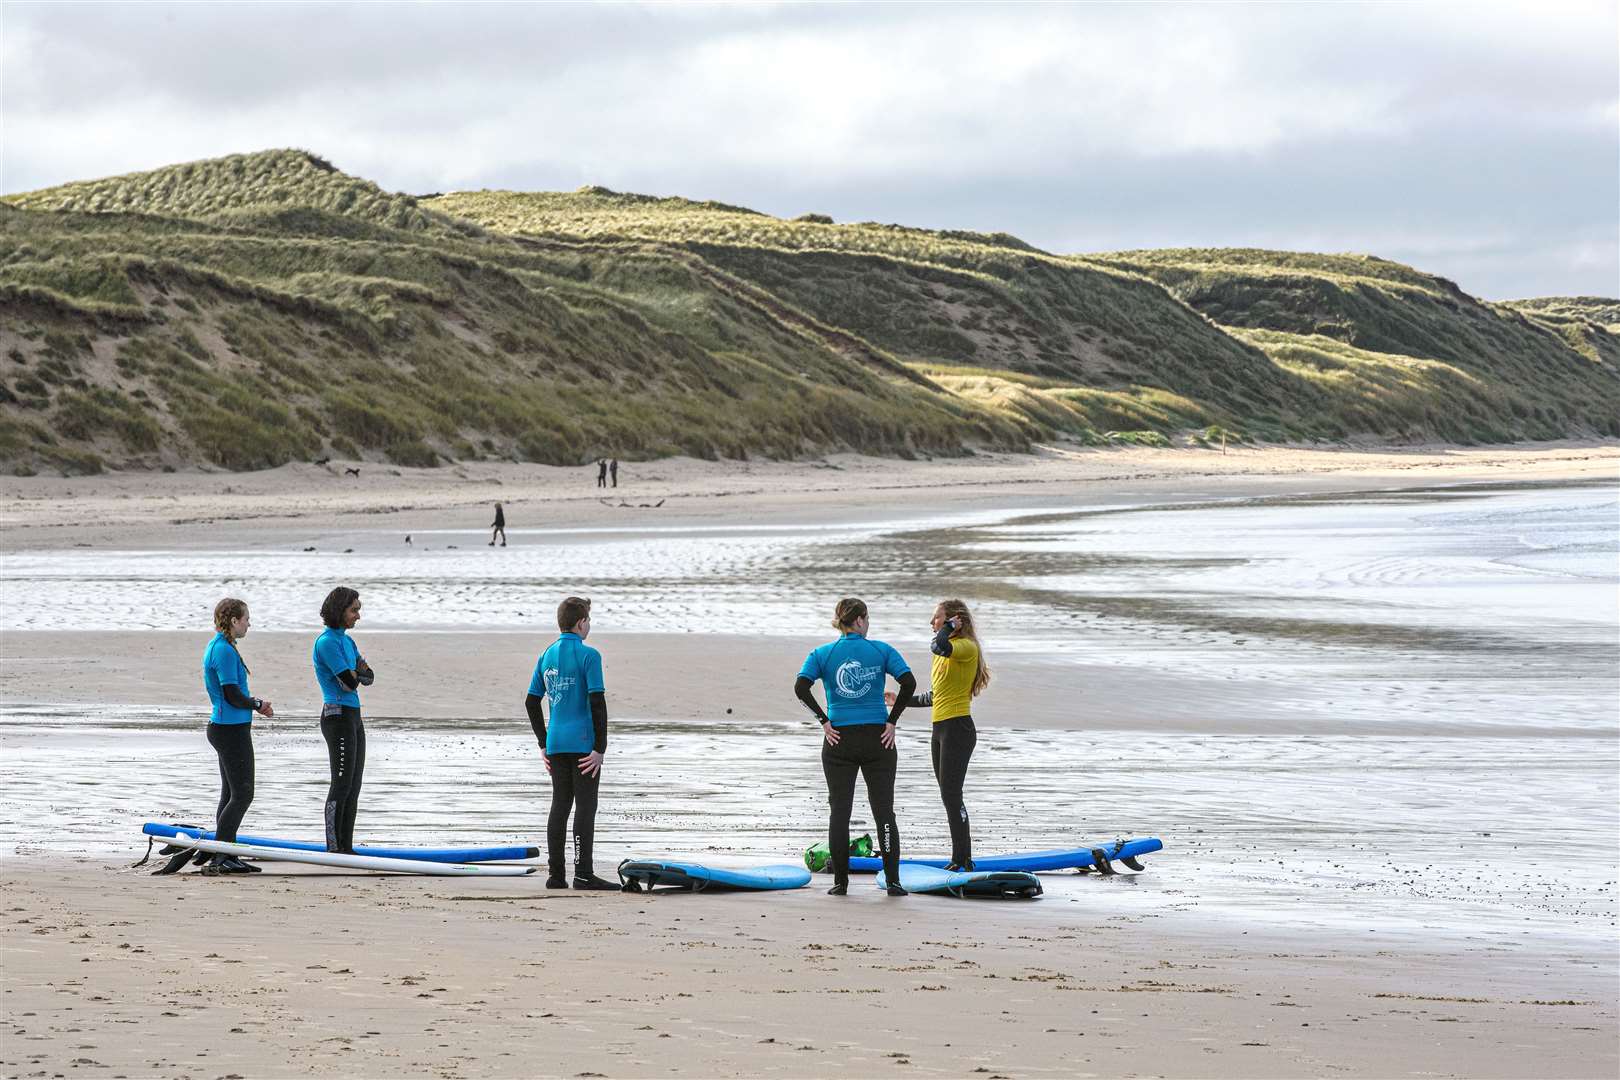 North Coast Watersports offers surfing experiences in Caithness.